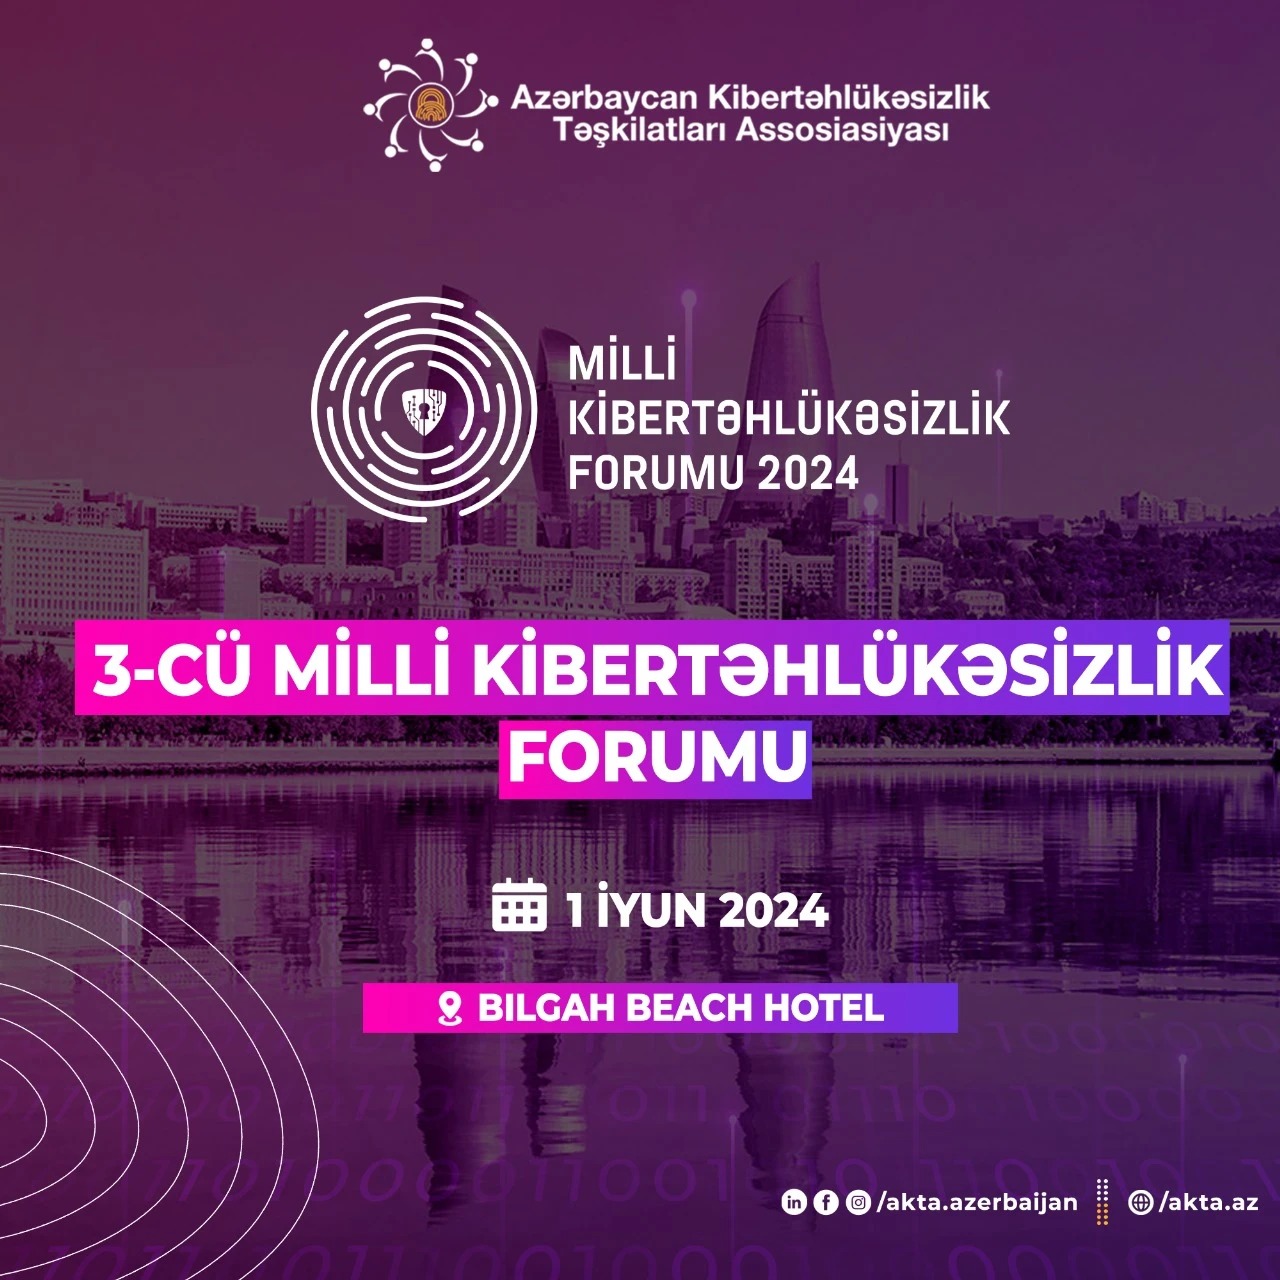 The 3rd National Cybersecurity Forum, organised by the Association of Cybersecurity Organisations of Azerbaijan (ACOA), will take place on June 1st.